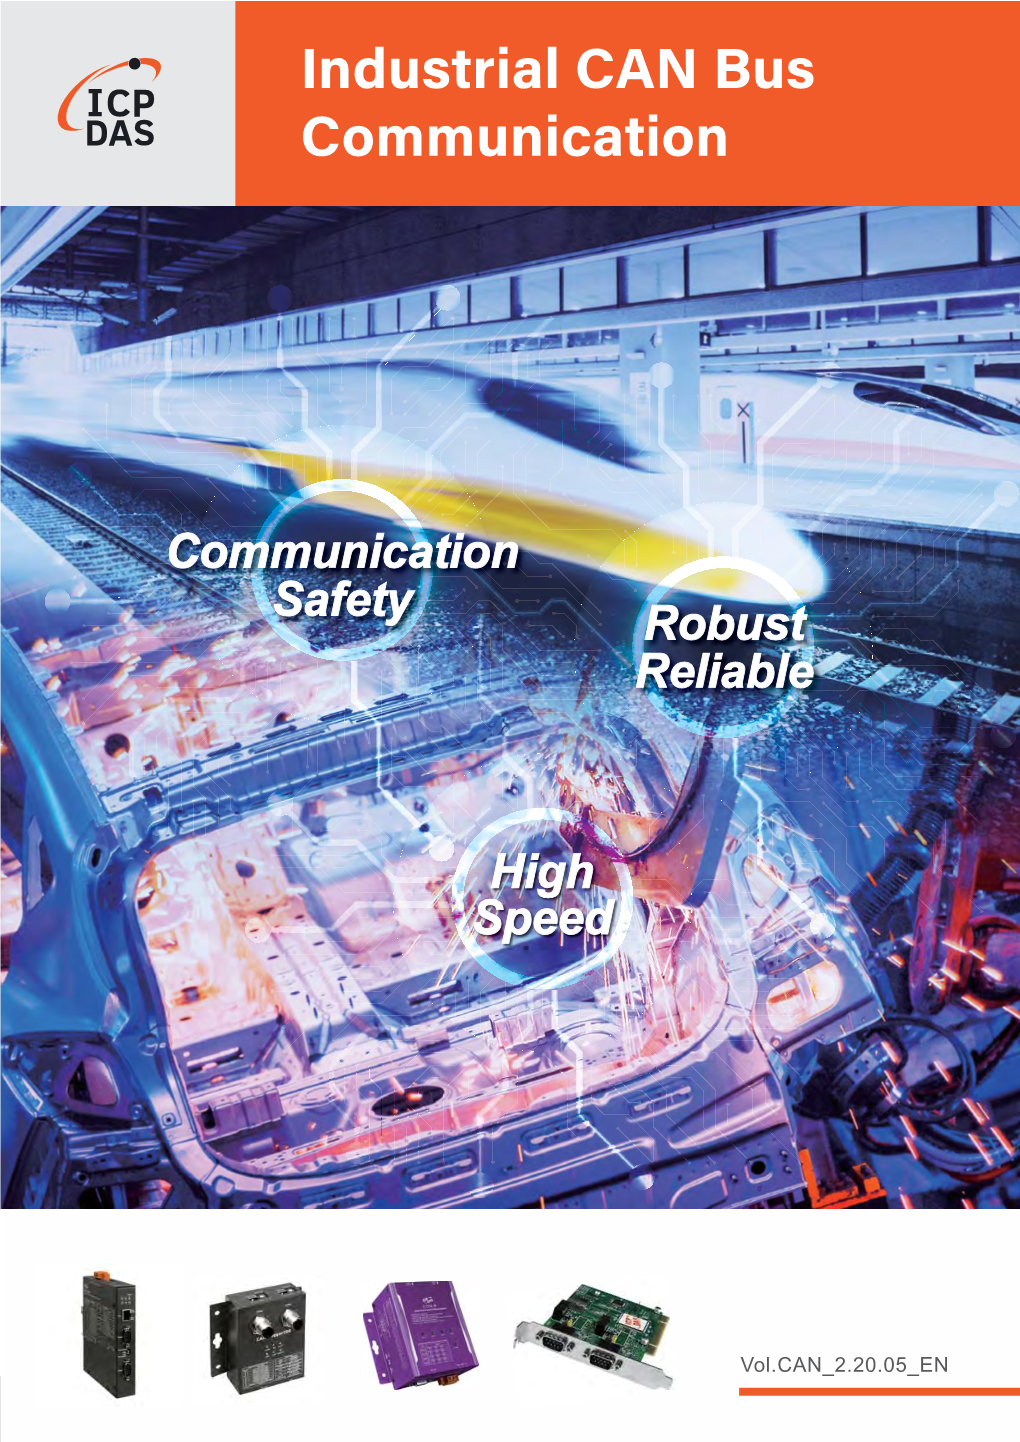 Robust Reliable Communication Safety